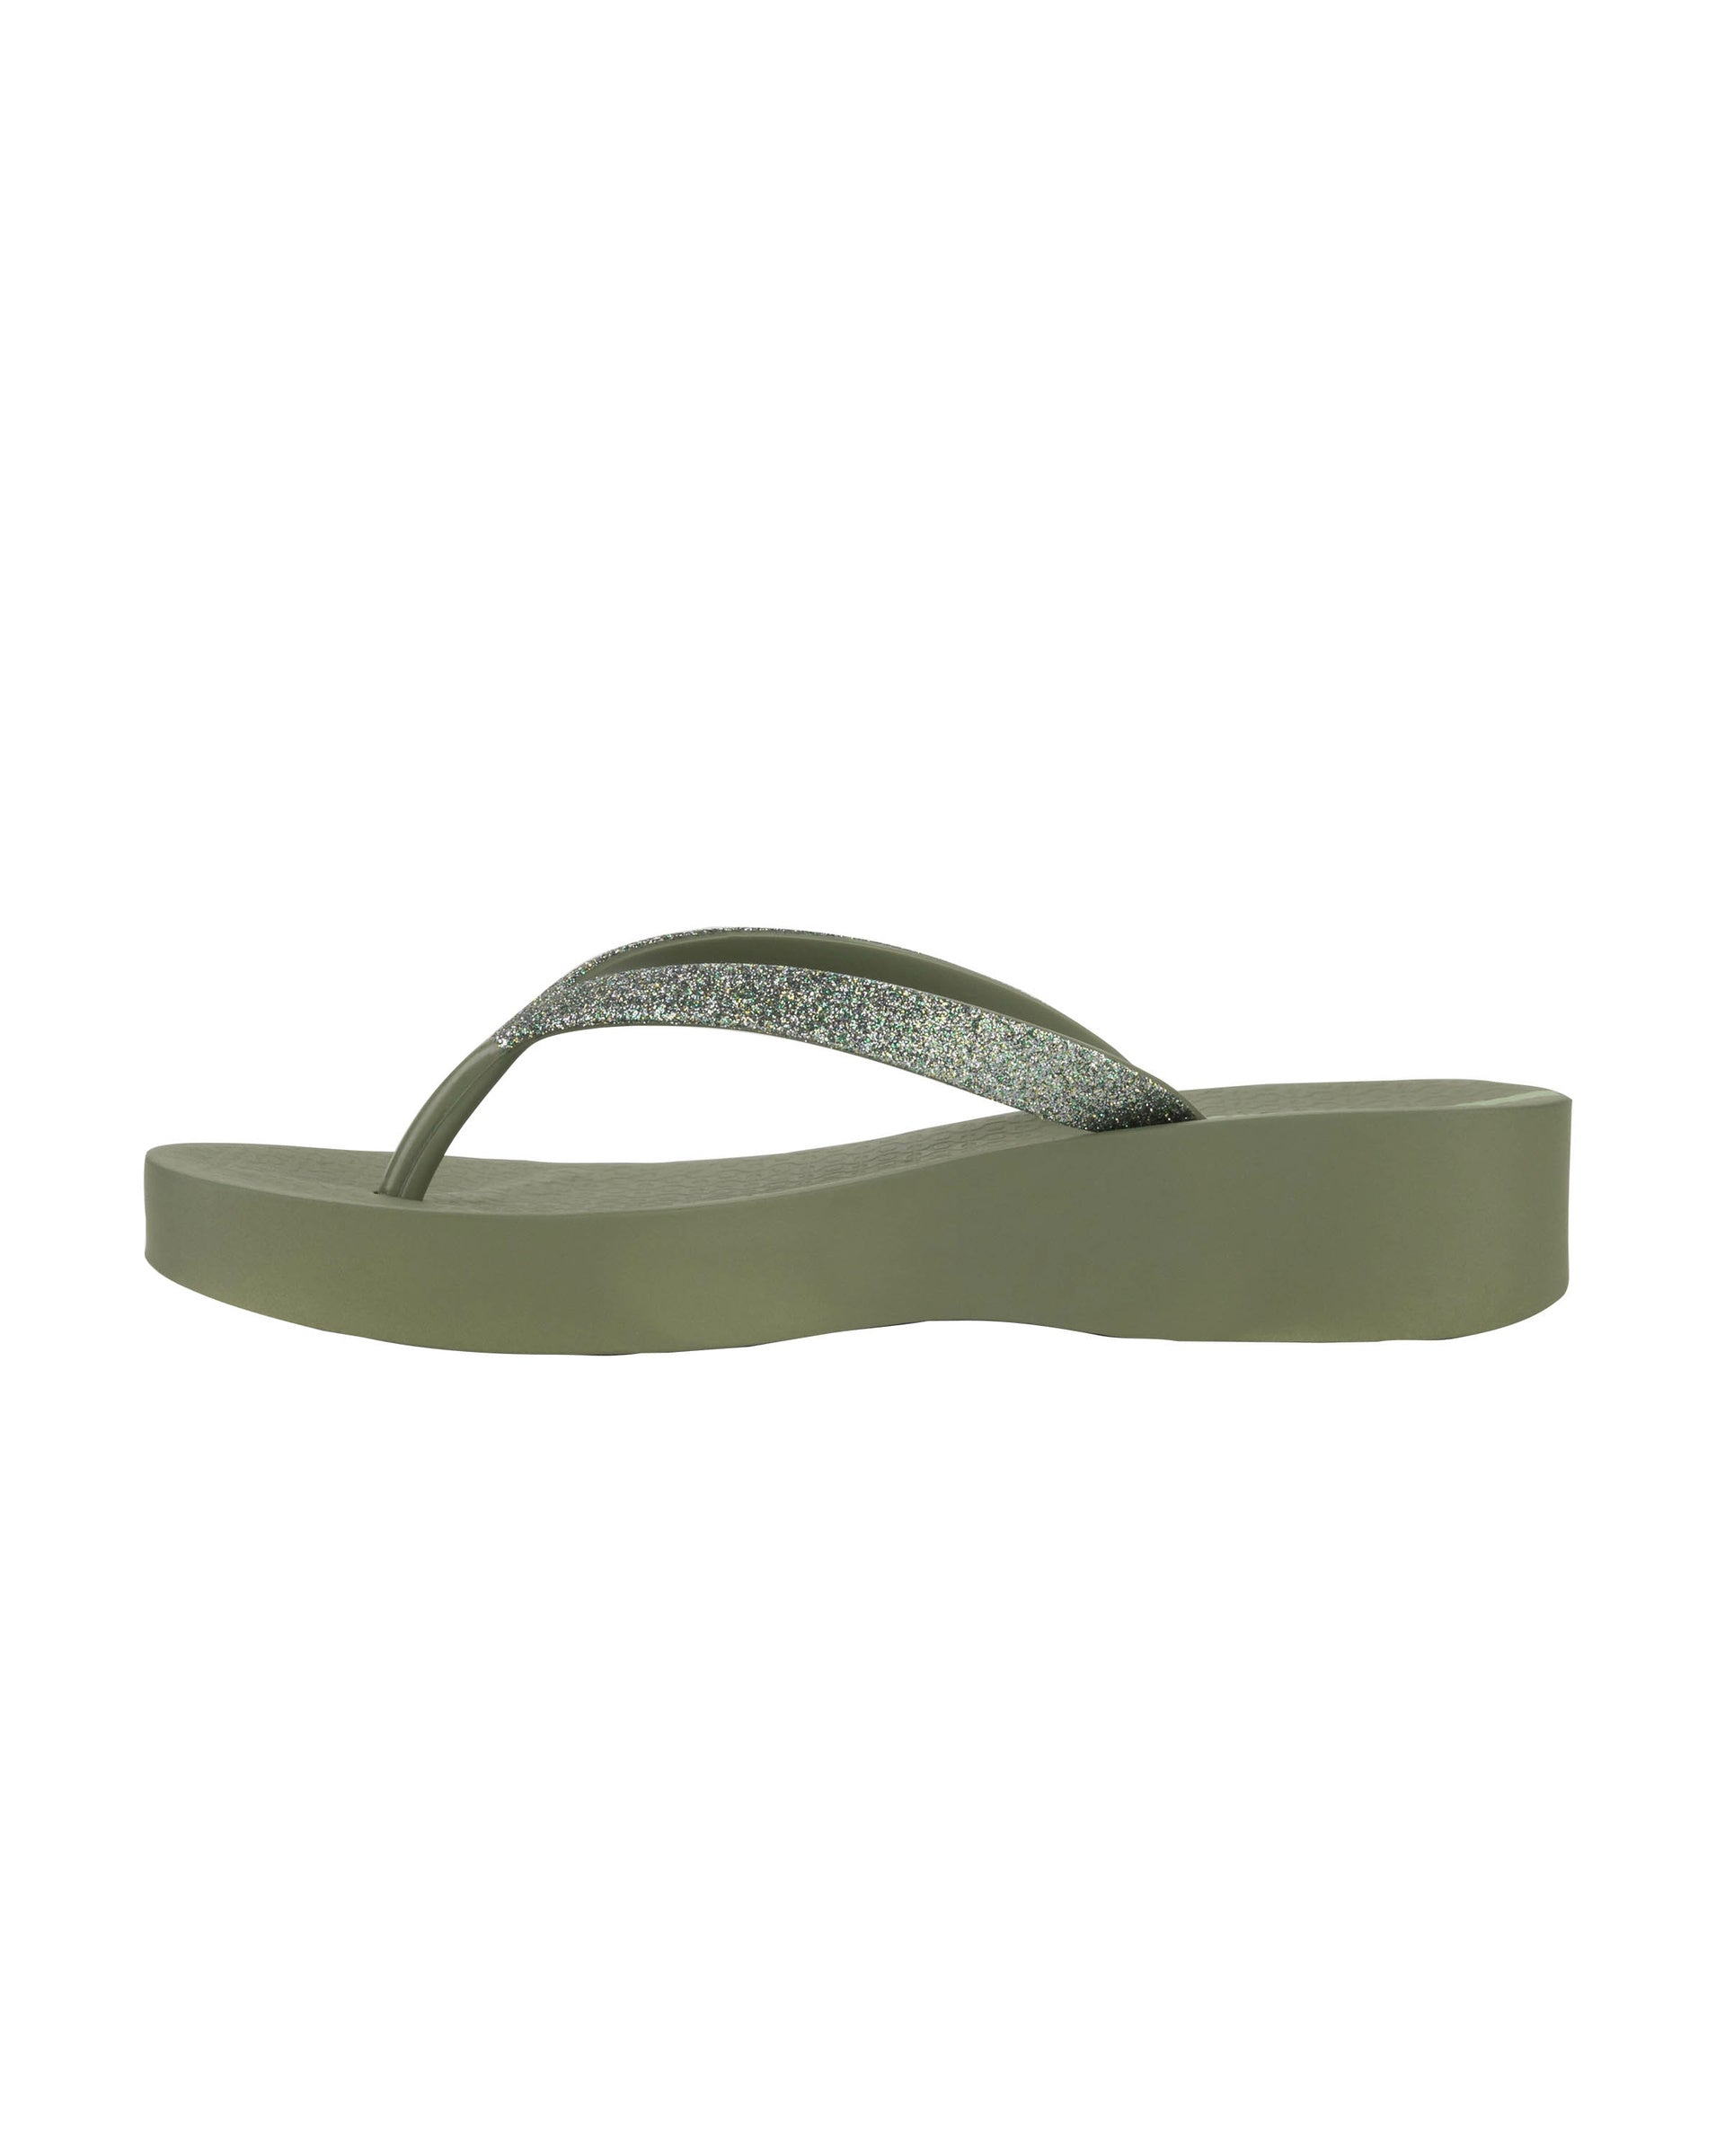 Inner side view of a green Ipanema Mesh Chic women's wedge flip flop with glitter green straps.